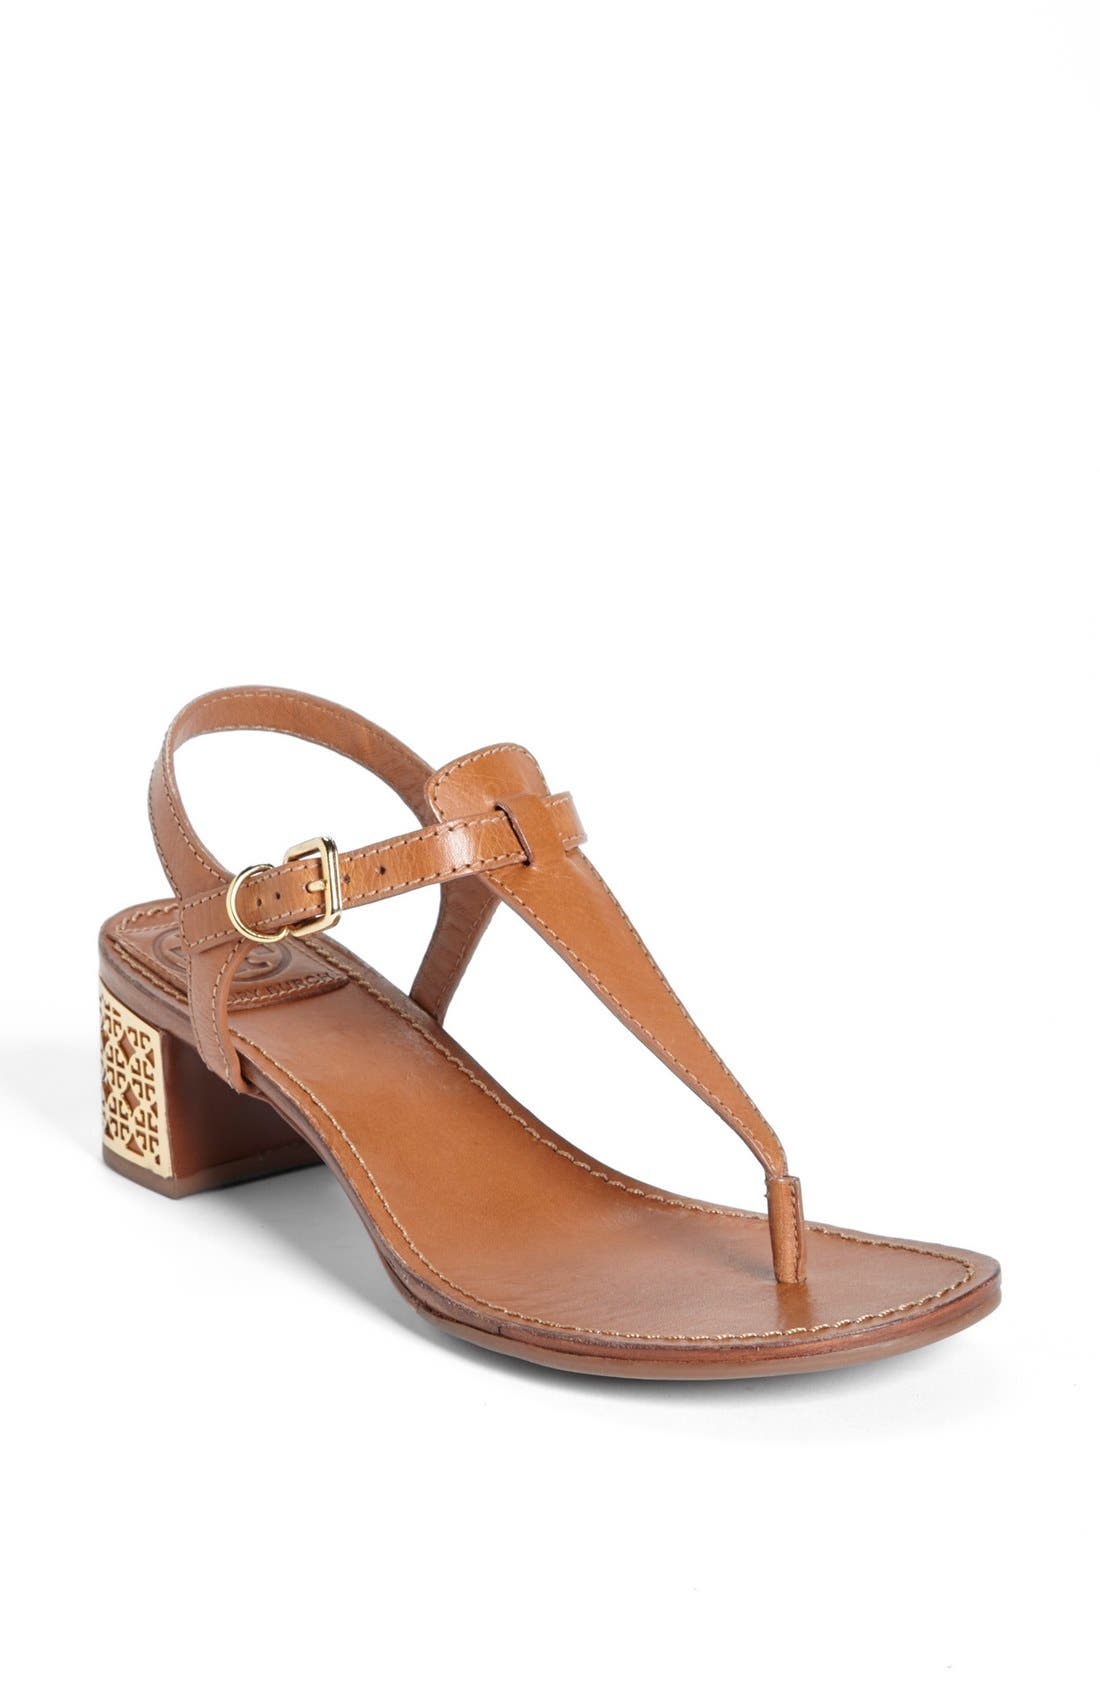 tory burch slippers nordstrom